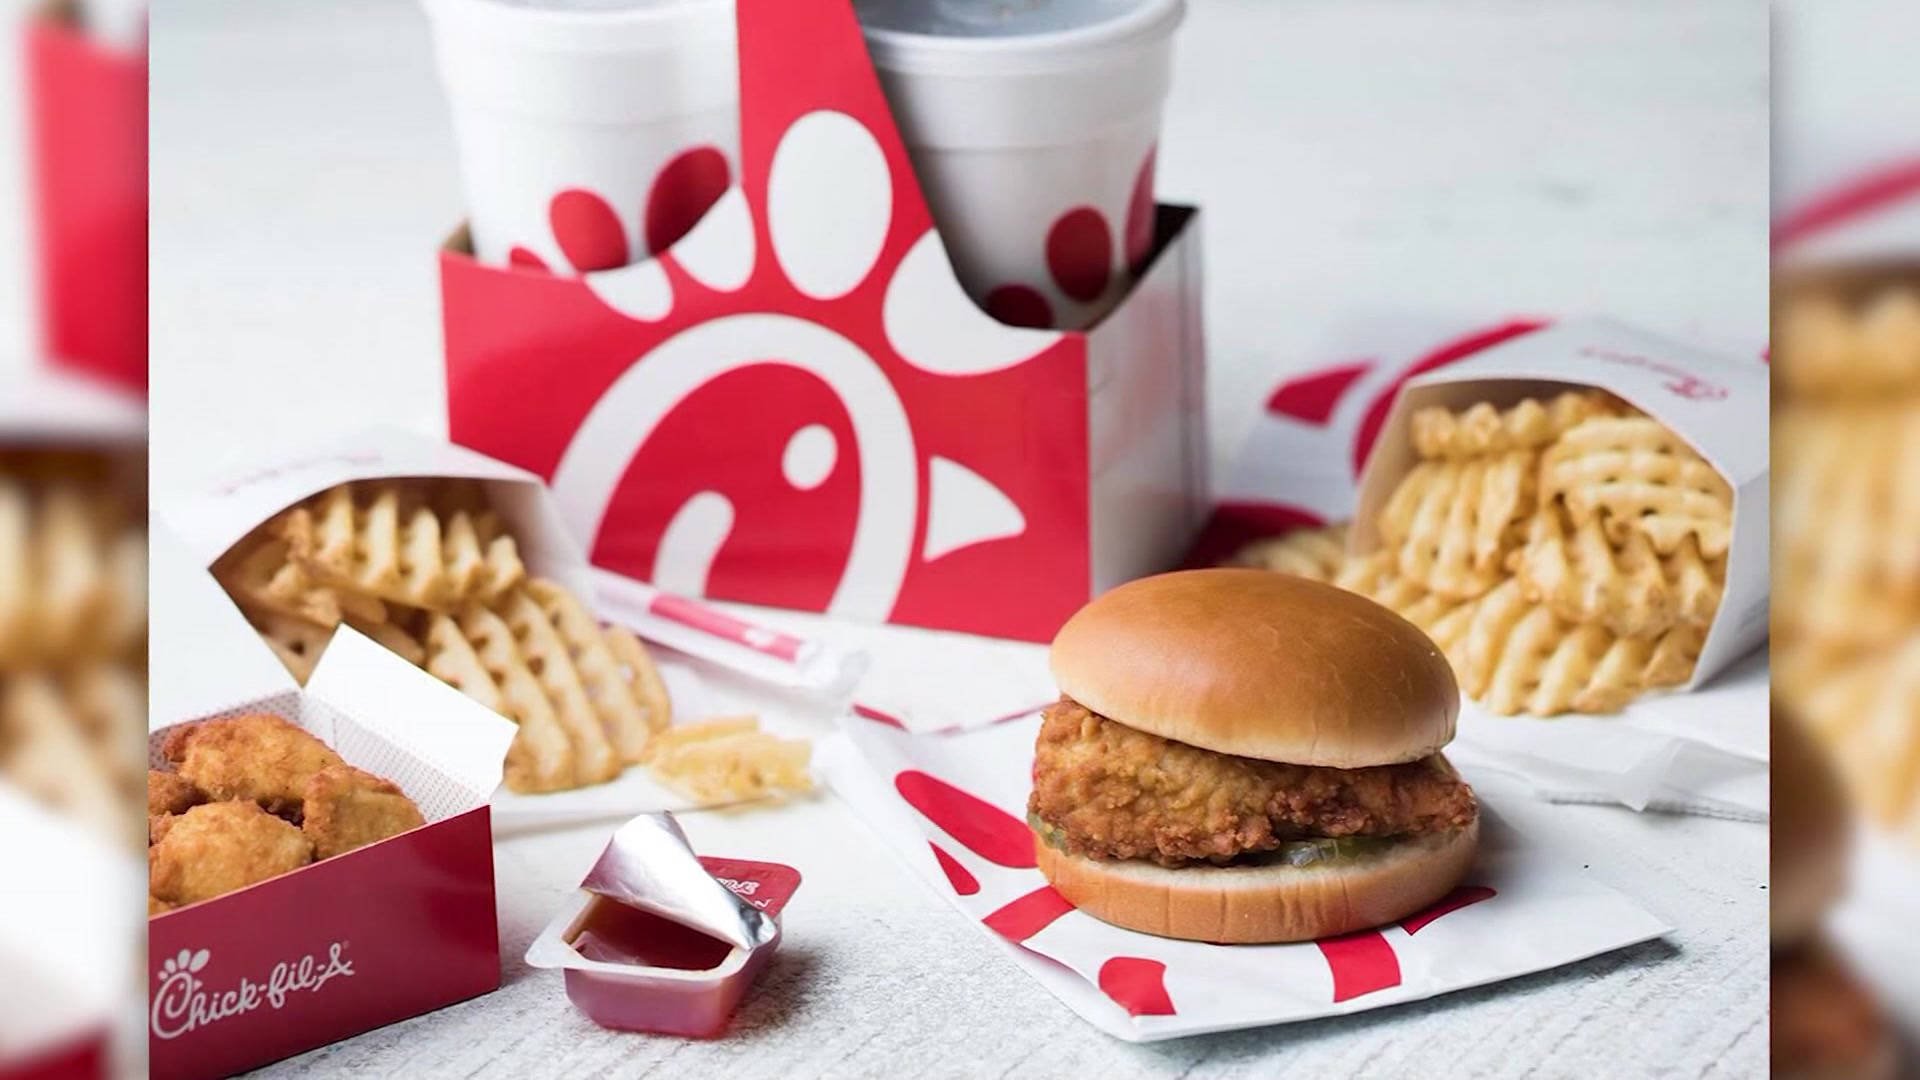 Chick Fil A Variety Meals Picture